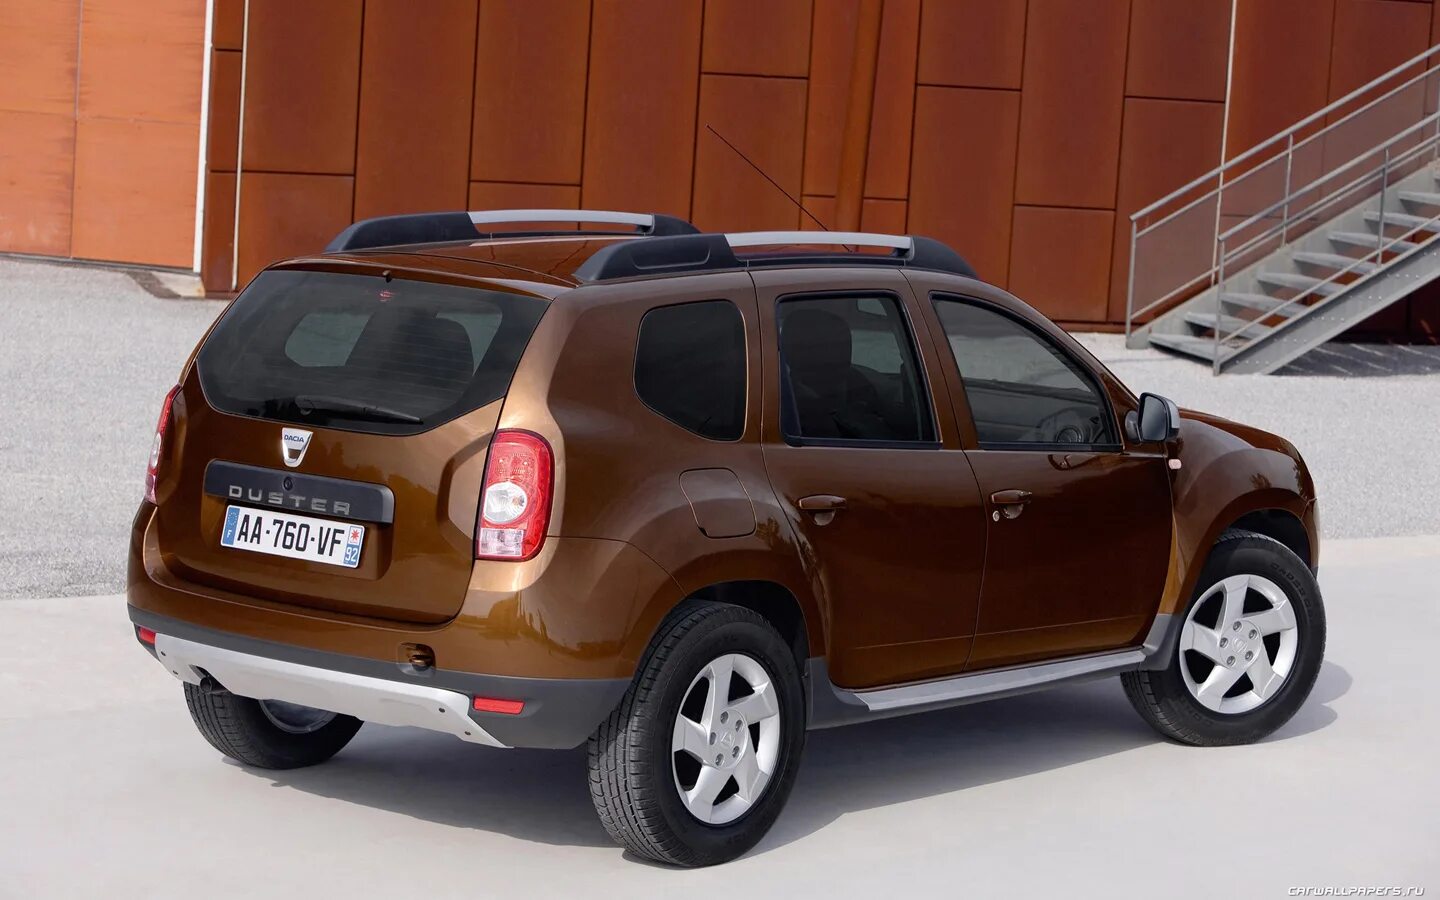 Какая машина дастер. Renault Duster 1. Ренаулт Дастер. Dacia Duster 2010. Renault Duster 2.